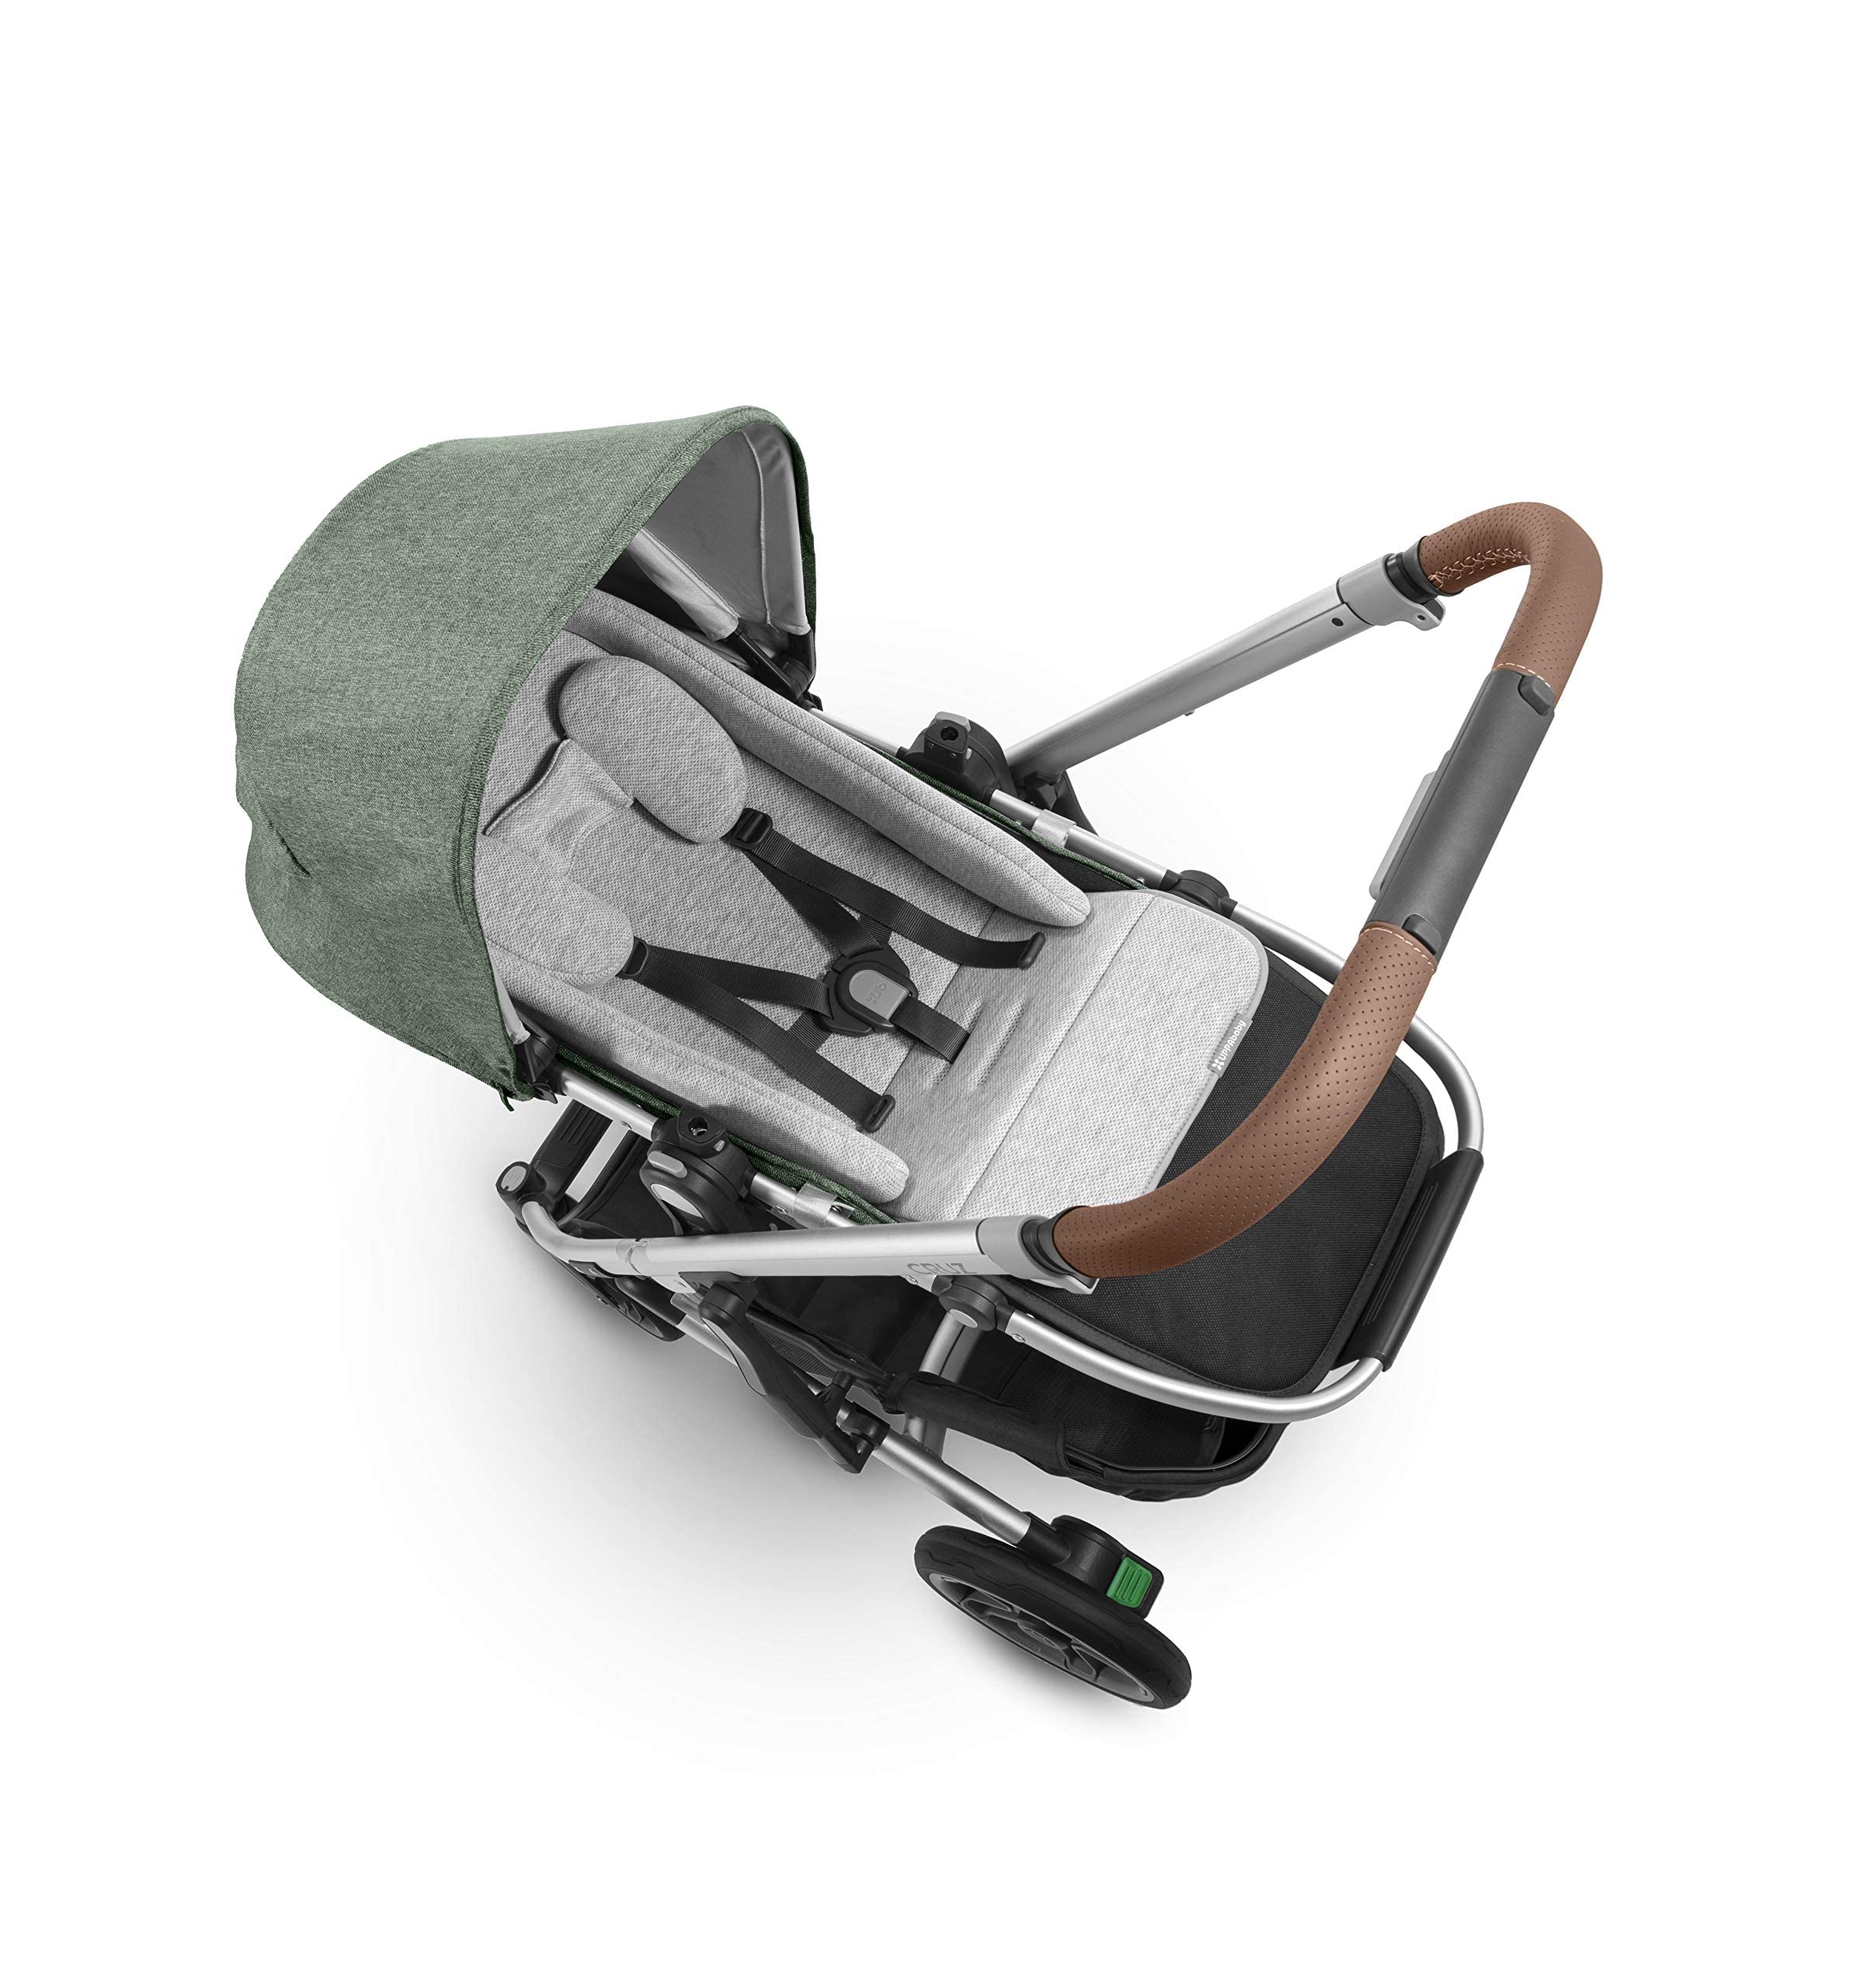 UPPAbaby Mesa V2 Infant Car Seat Easy Installation + Innovative SmartSecure Technology Attaches to Stroller Base + Robust Infant Insert Included Gregory (Blue Mélange/Merino Wool) & Infant Snugseat